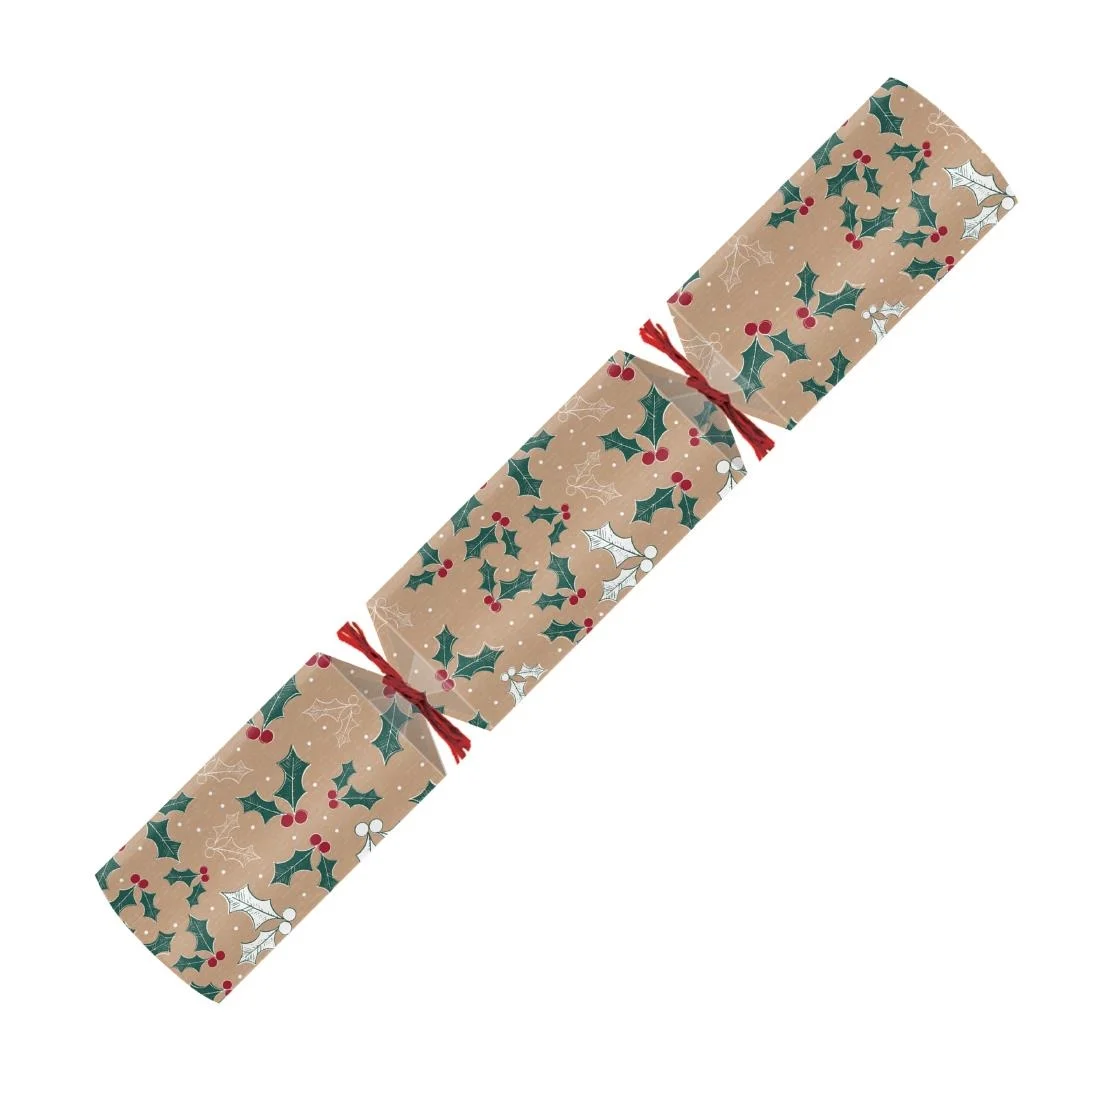 Eco-friendly Christmas crackers are better for the environment as they contain non-recyclable materials such as plastics, dyes and glitters.